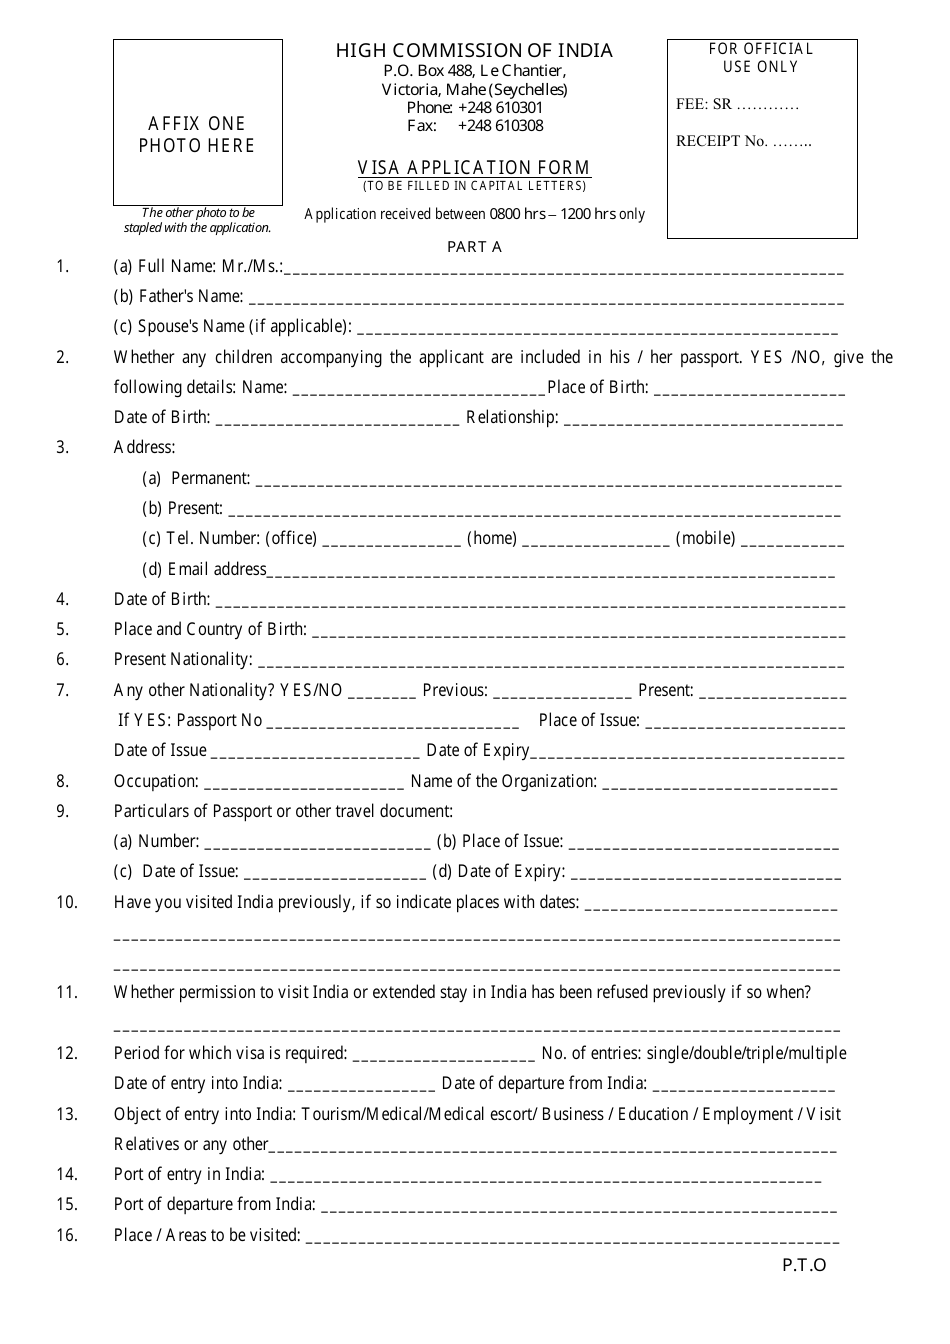 Indian Visa Application Form - High Commission of India, Victoria-Mahe, Seychelles, Page 1